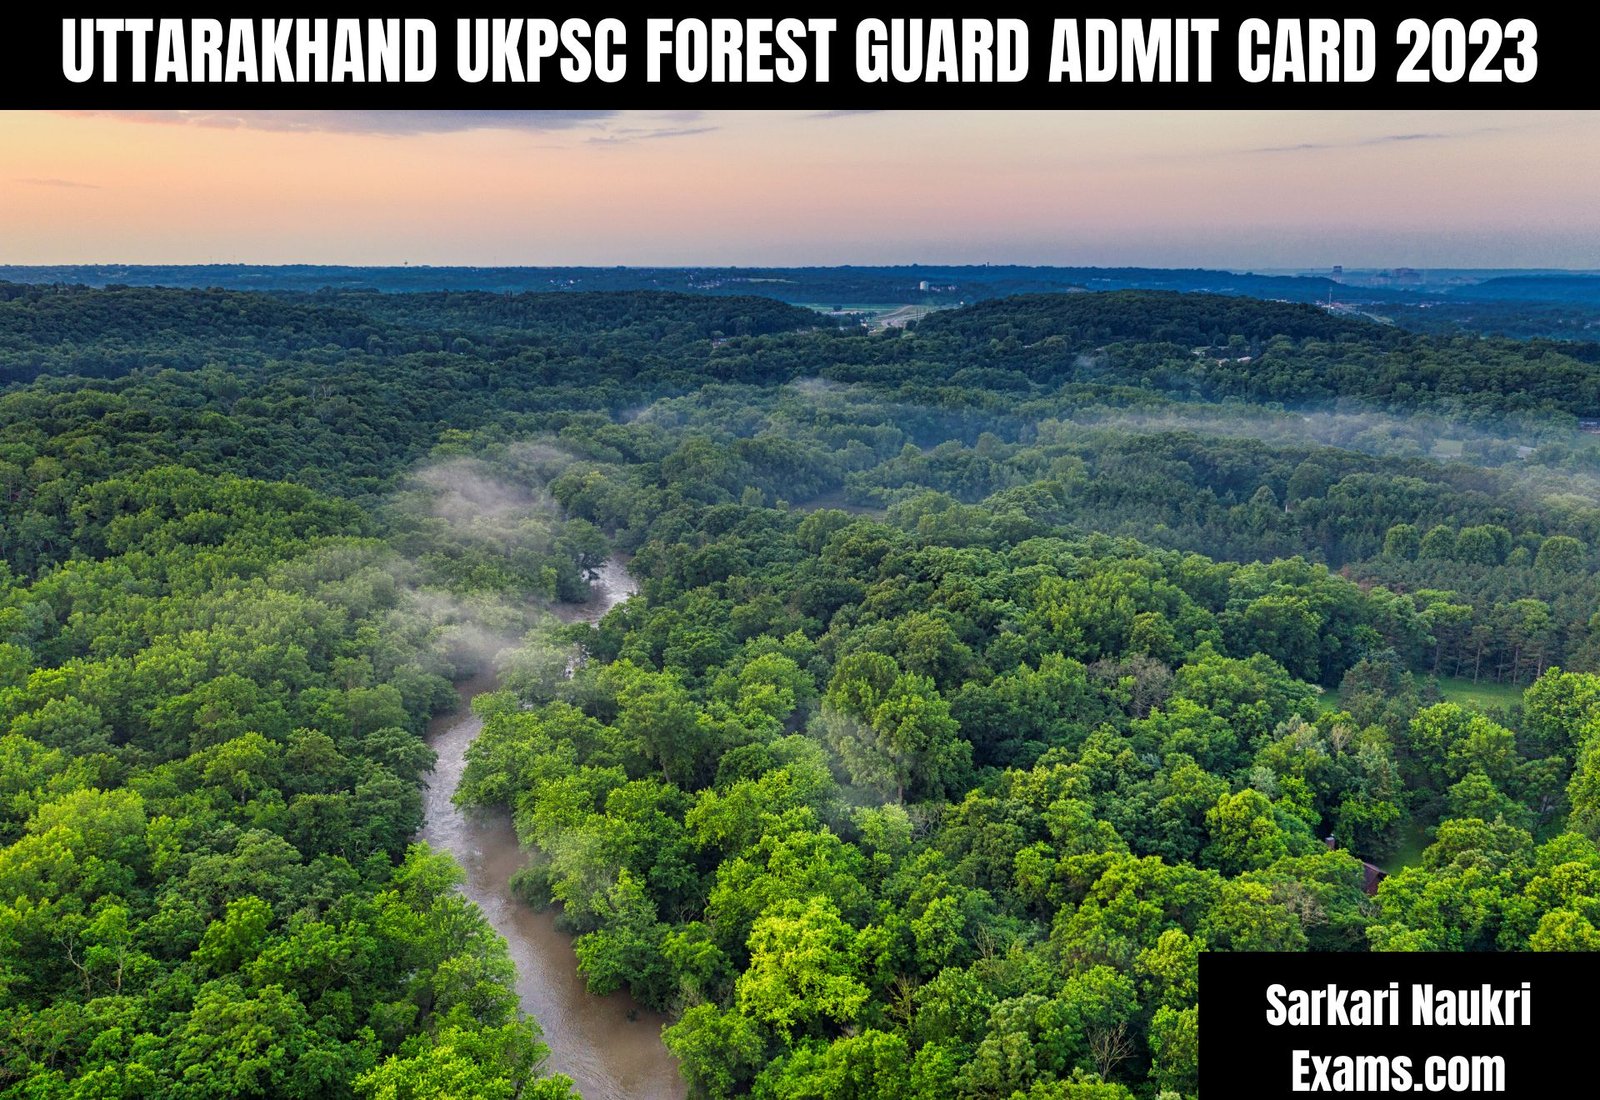 Uttarakhand UKPSC Forest Guard Admit Card 2023 (OUT) | Download Link, Exam Date